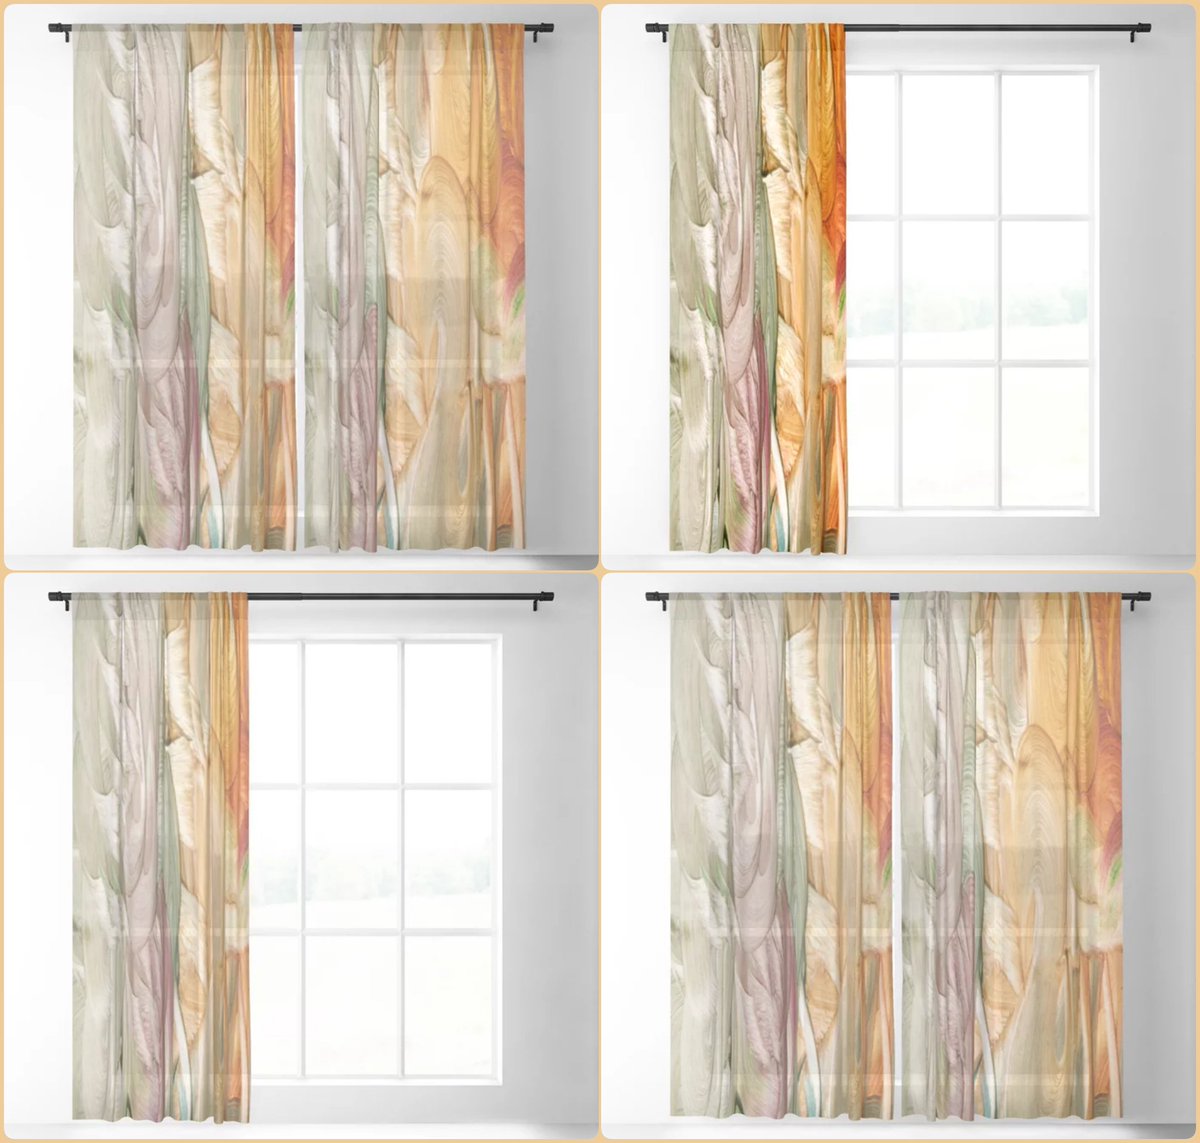 Oceanids Sheer & Blackout Curtain~by Art Falaxy~
~Exquisite Decor~
#artfalaxy #art #curtains

#drapes #homedecor #society6 #Society6max #swirls #accents #sheercurtains #blackoutcurtains #floorrugs

society6.com/product/oceani…
society6.com/product/oceani…